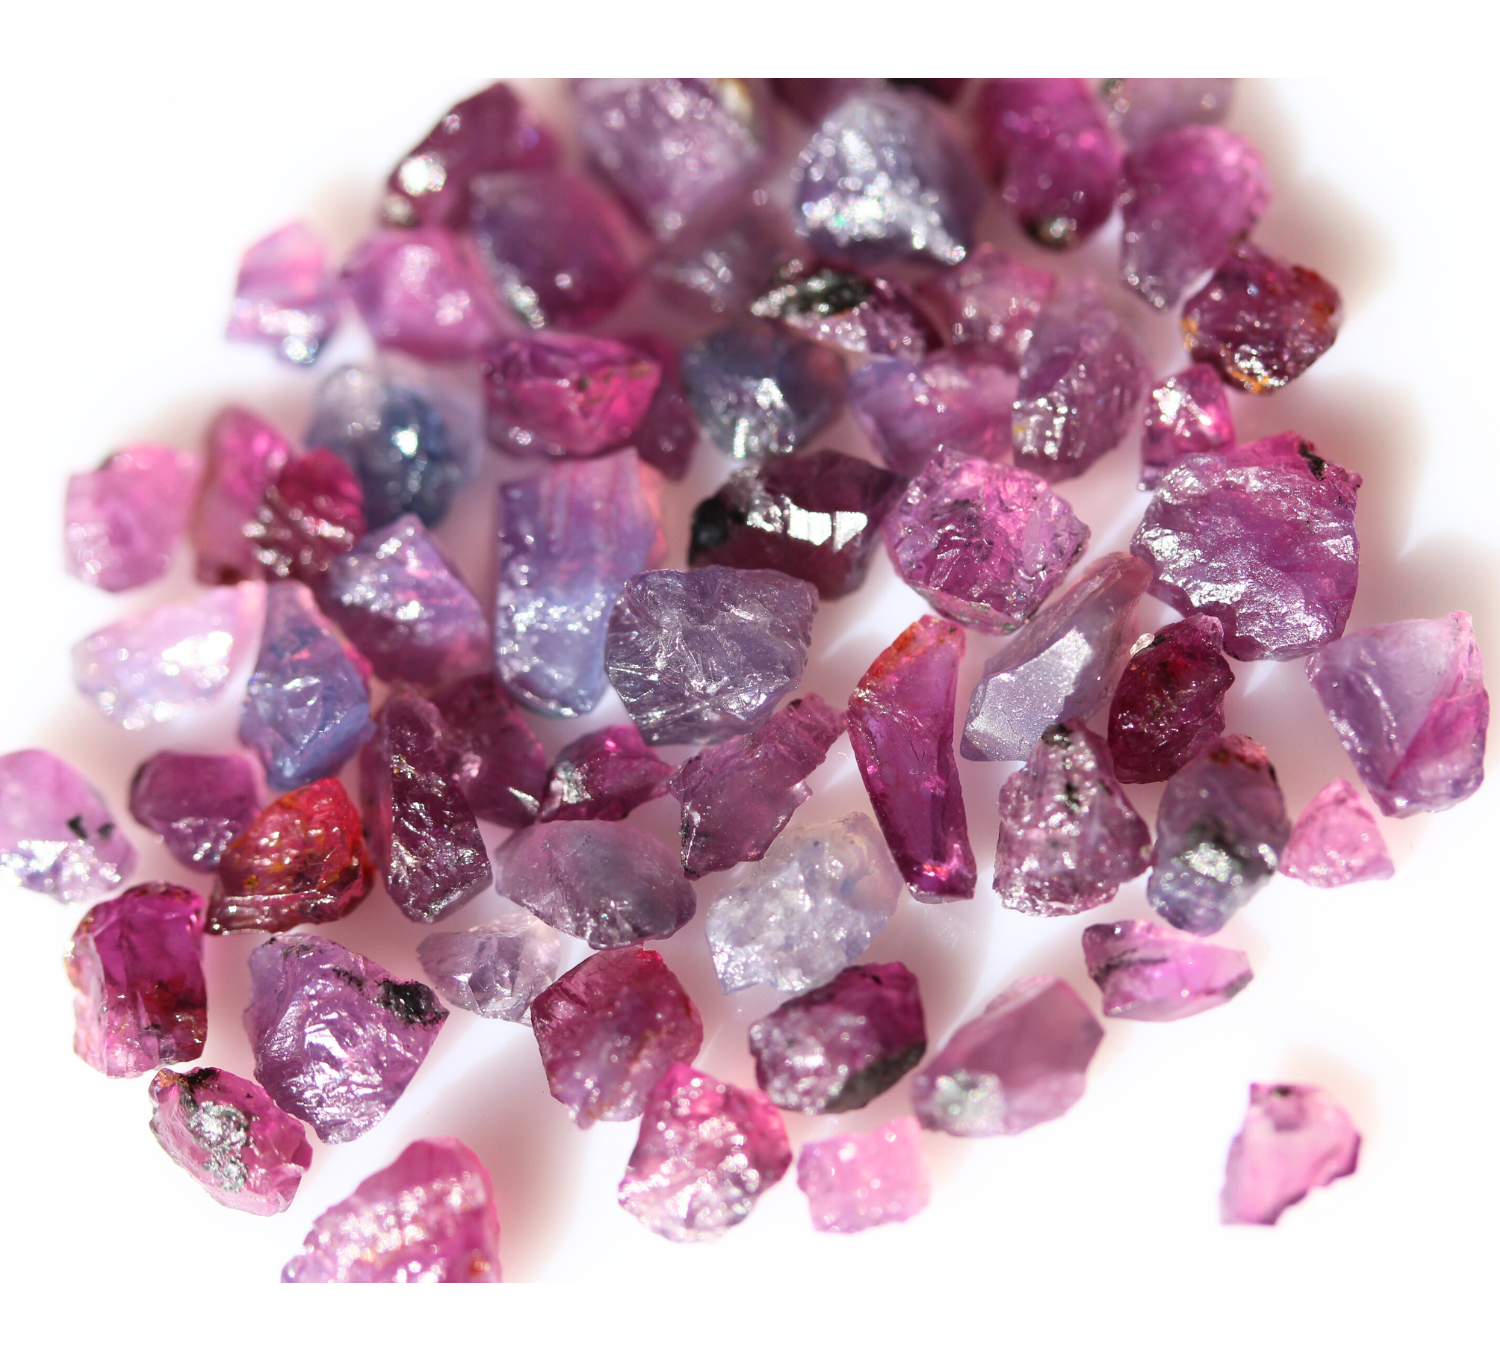 Raw Pink Sapphire Stones for Gemstone Cutters